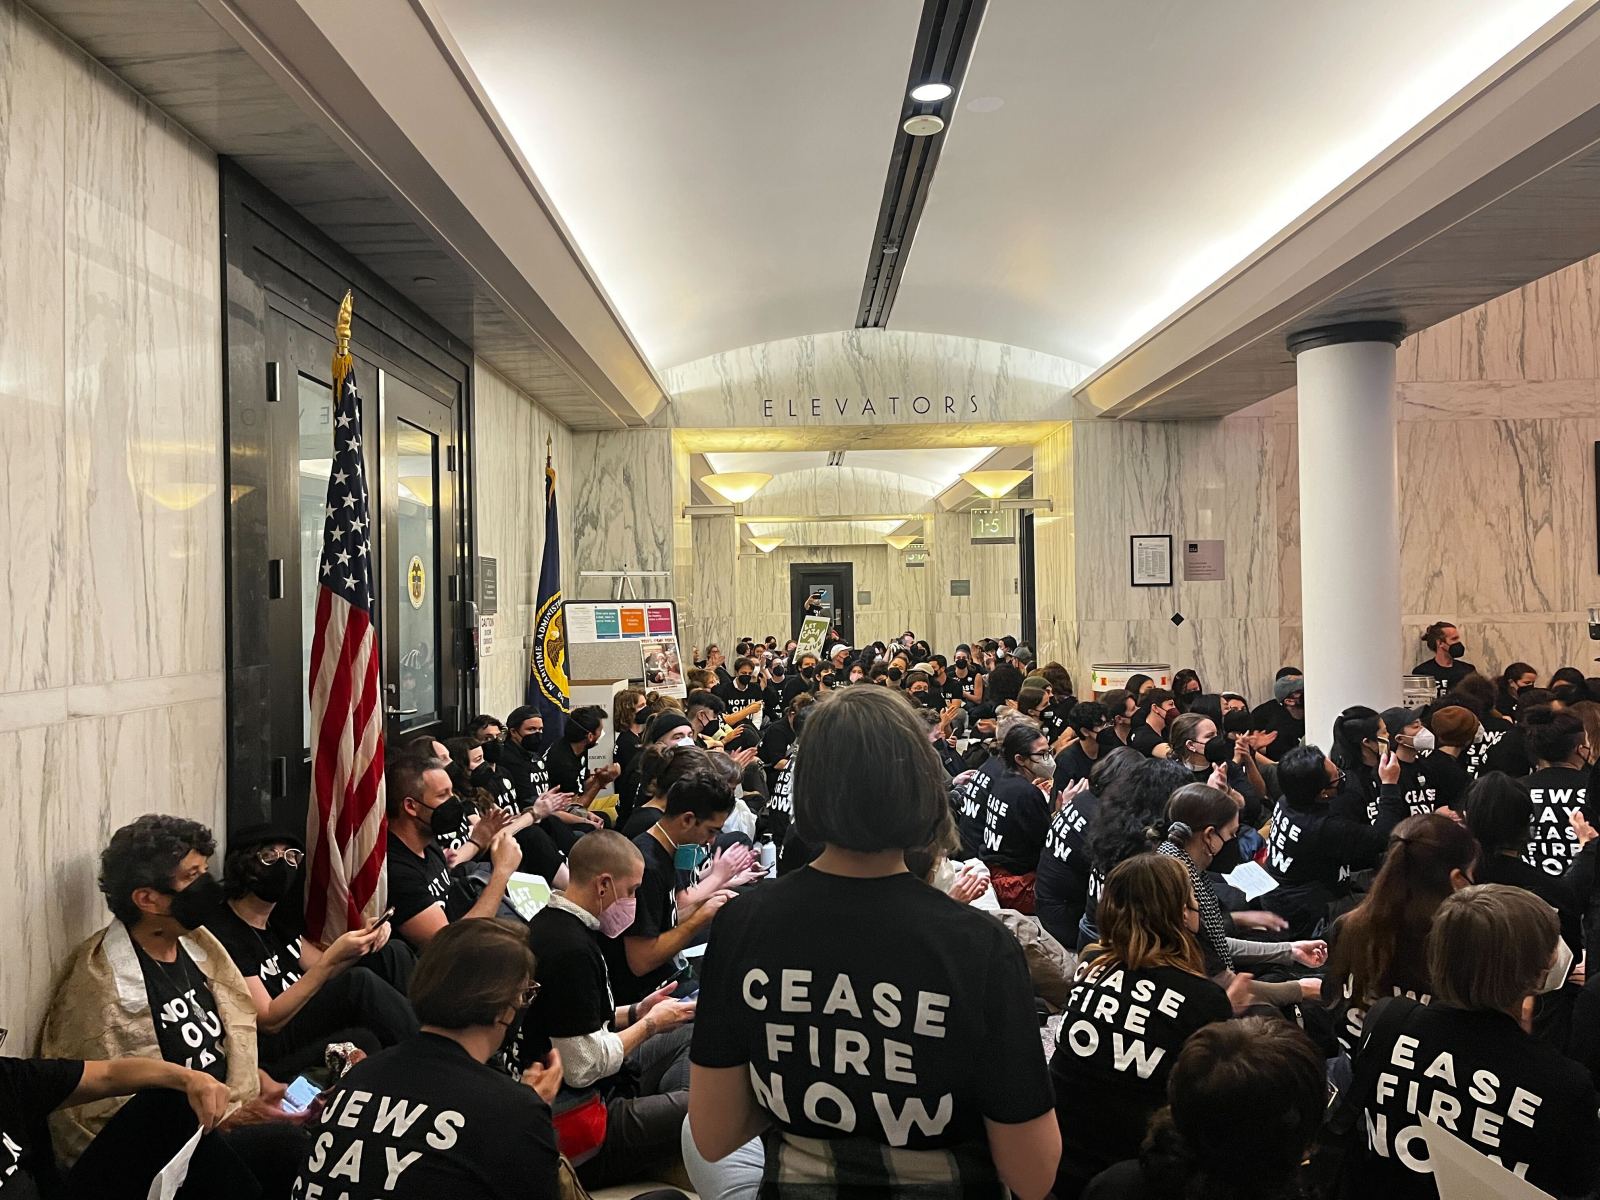 Scores of people in black shirts, some of which say "Ceasefire Now," sit inside the lobby of one of the towers of the Oakland Federal building.